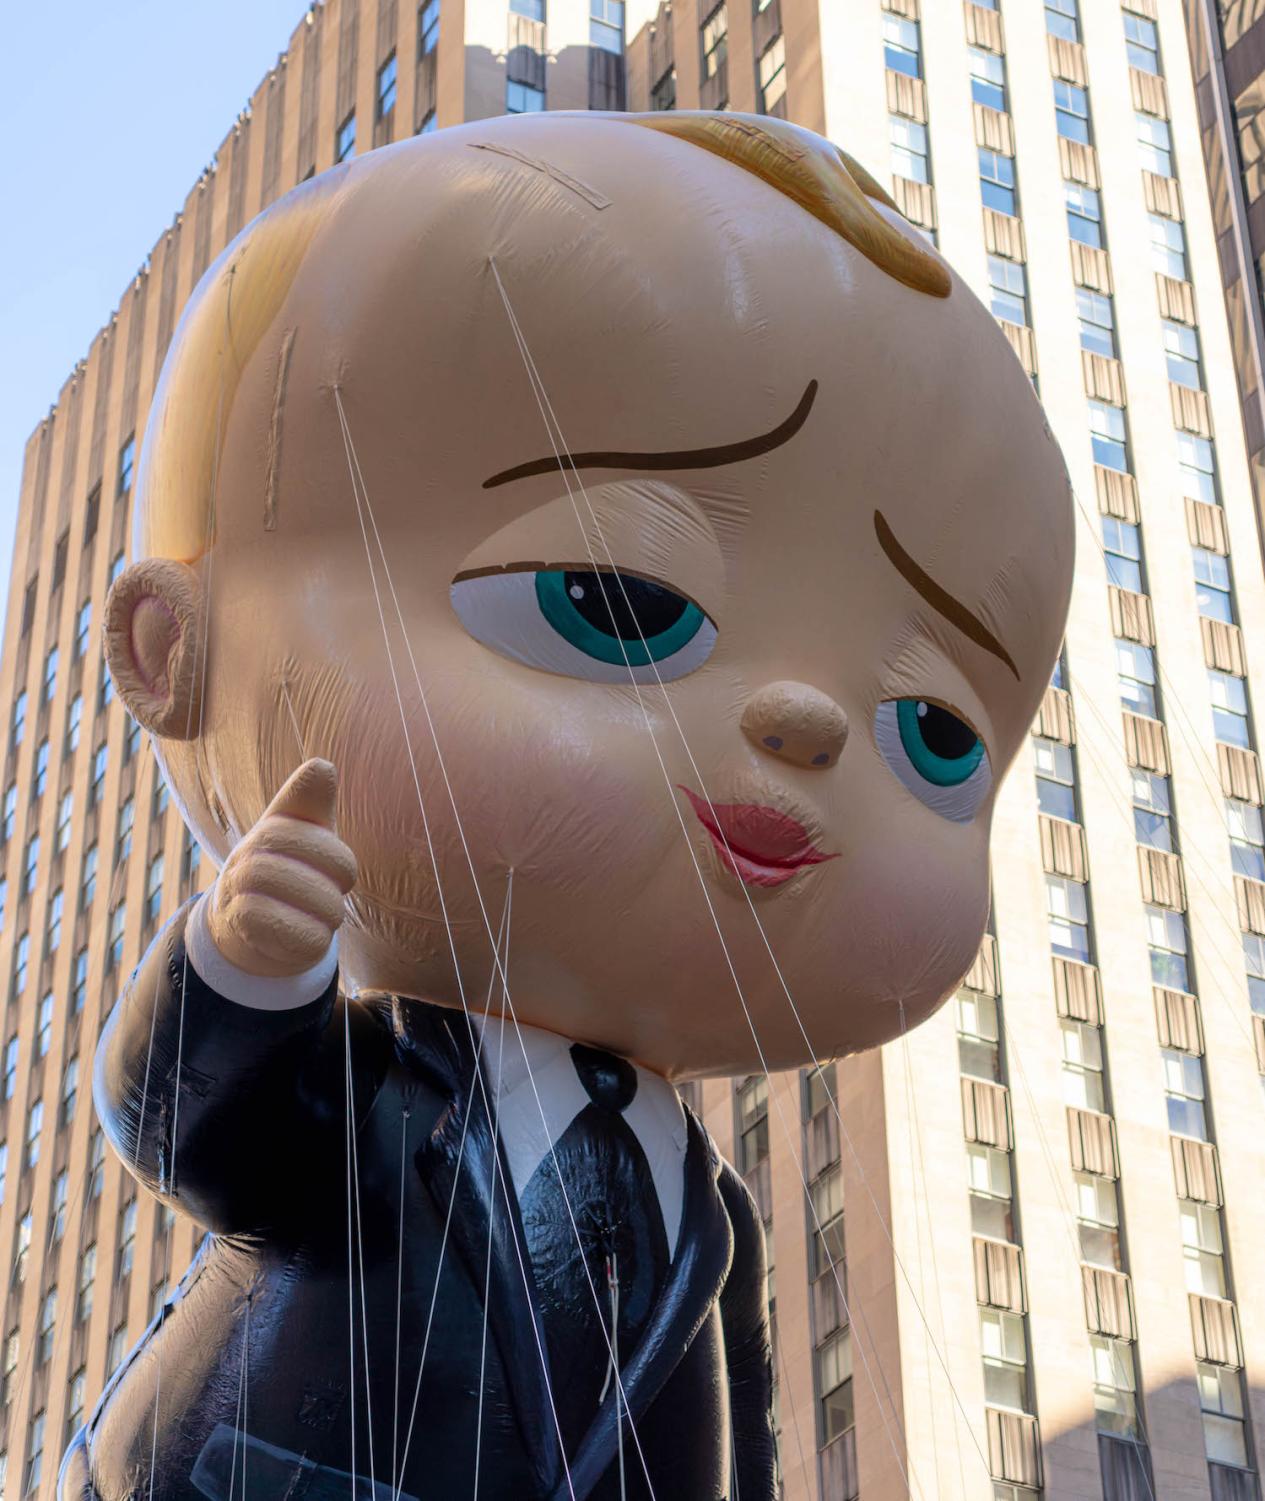 A large balloon in the shape of Boss Baby, a white baby with blond hair dressed in black suit and tie.